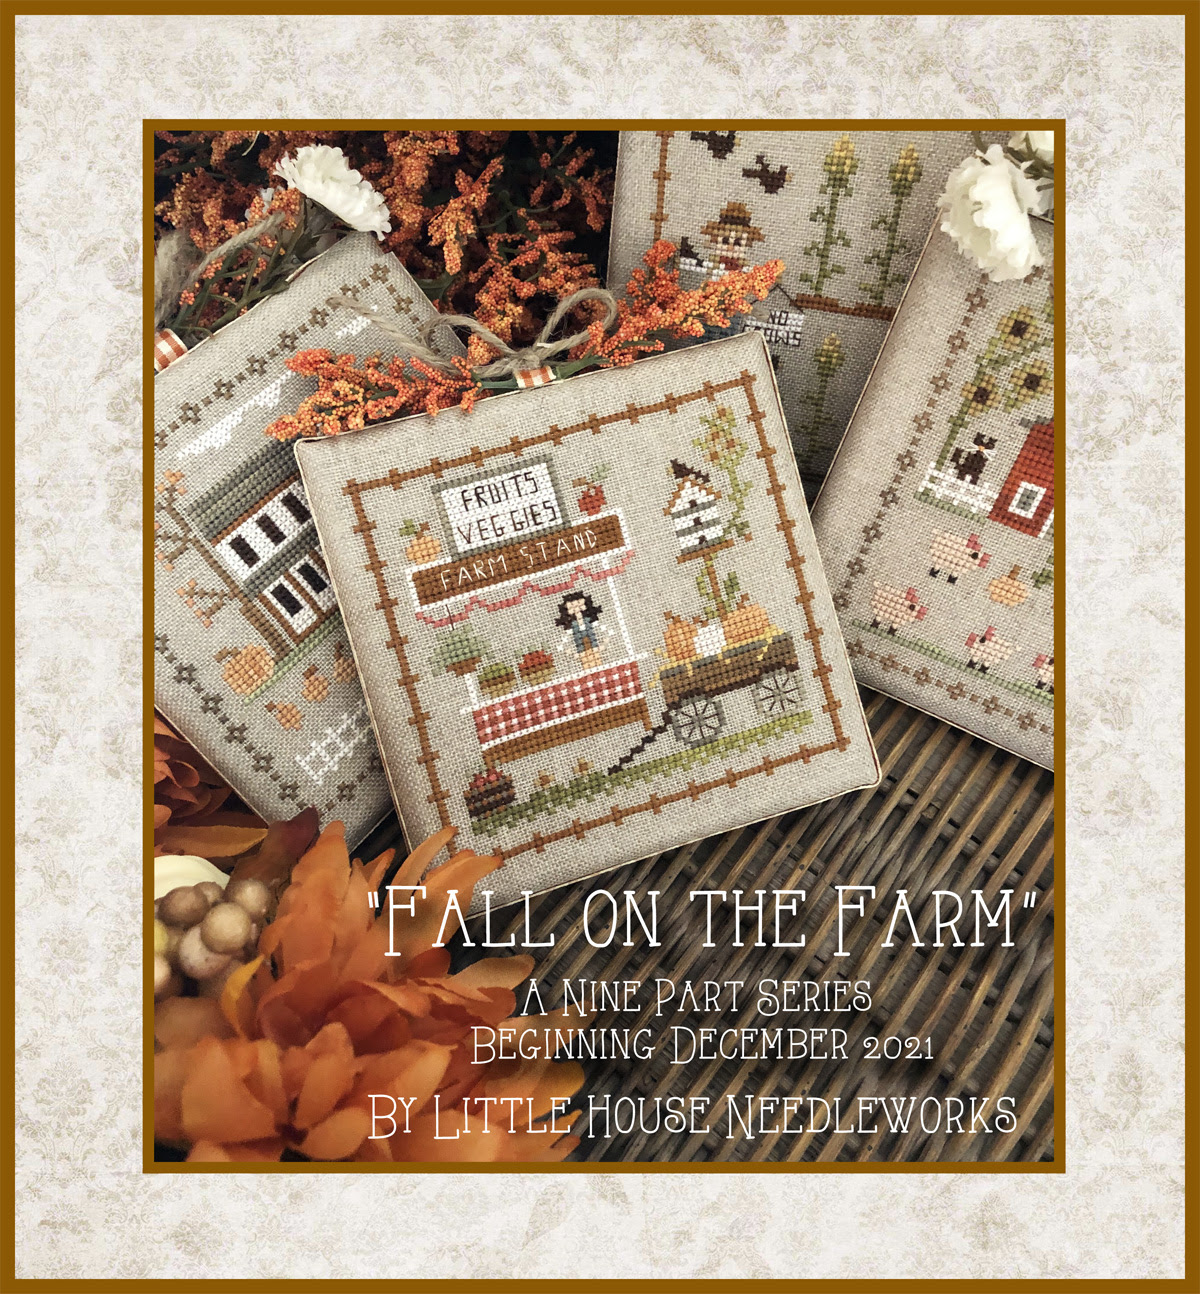 Little House Needleworks - Fall on the Farm - Pattern Set (9th pattern NOT YET INCLUDED)